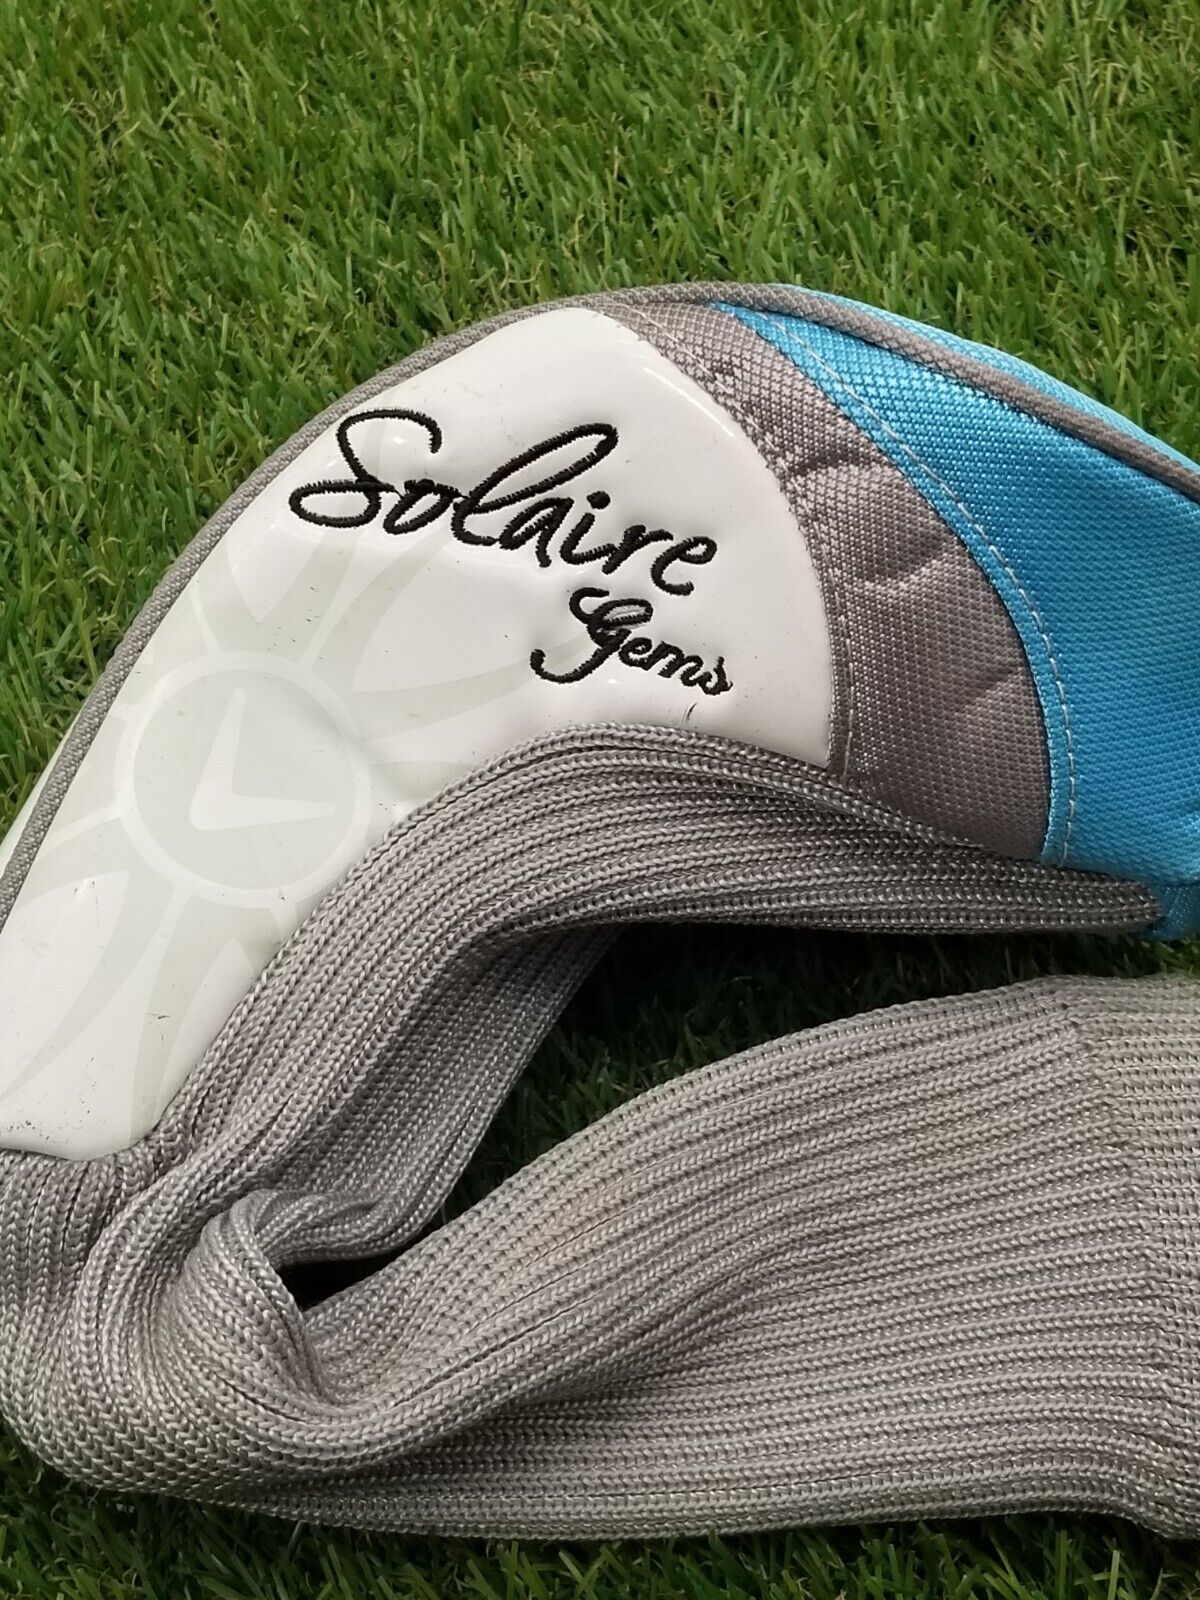 CALLAWAY SOLAIRE GEMS DRIVER HEADCOVER VERYGOOD